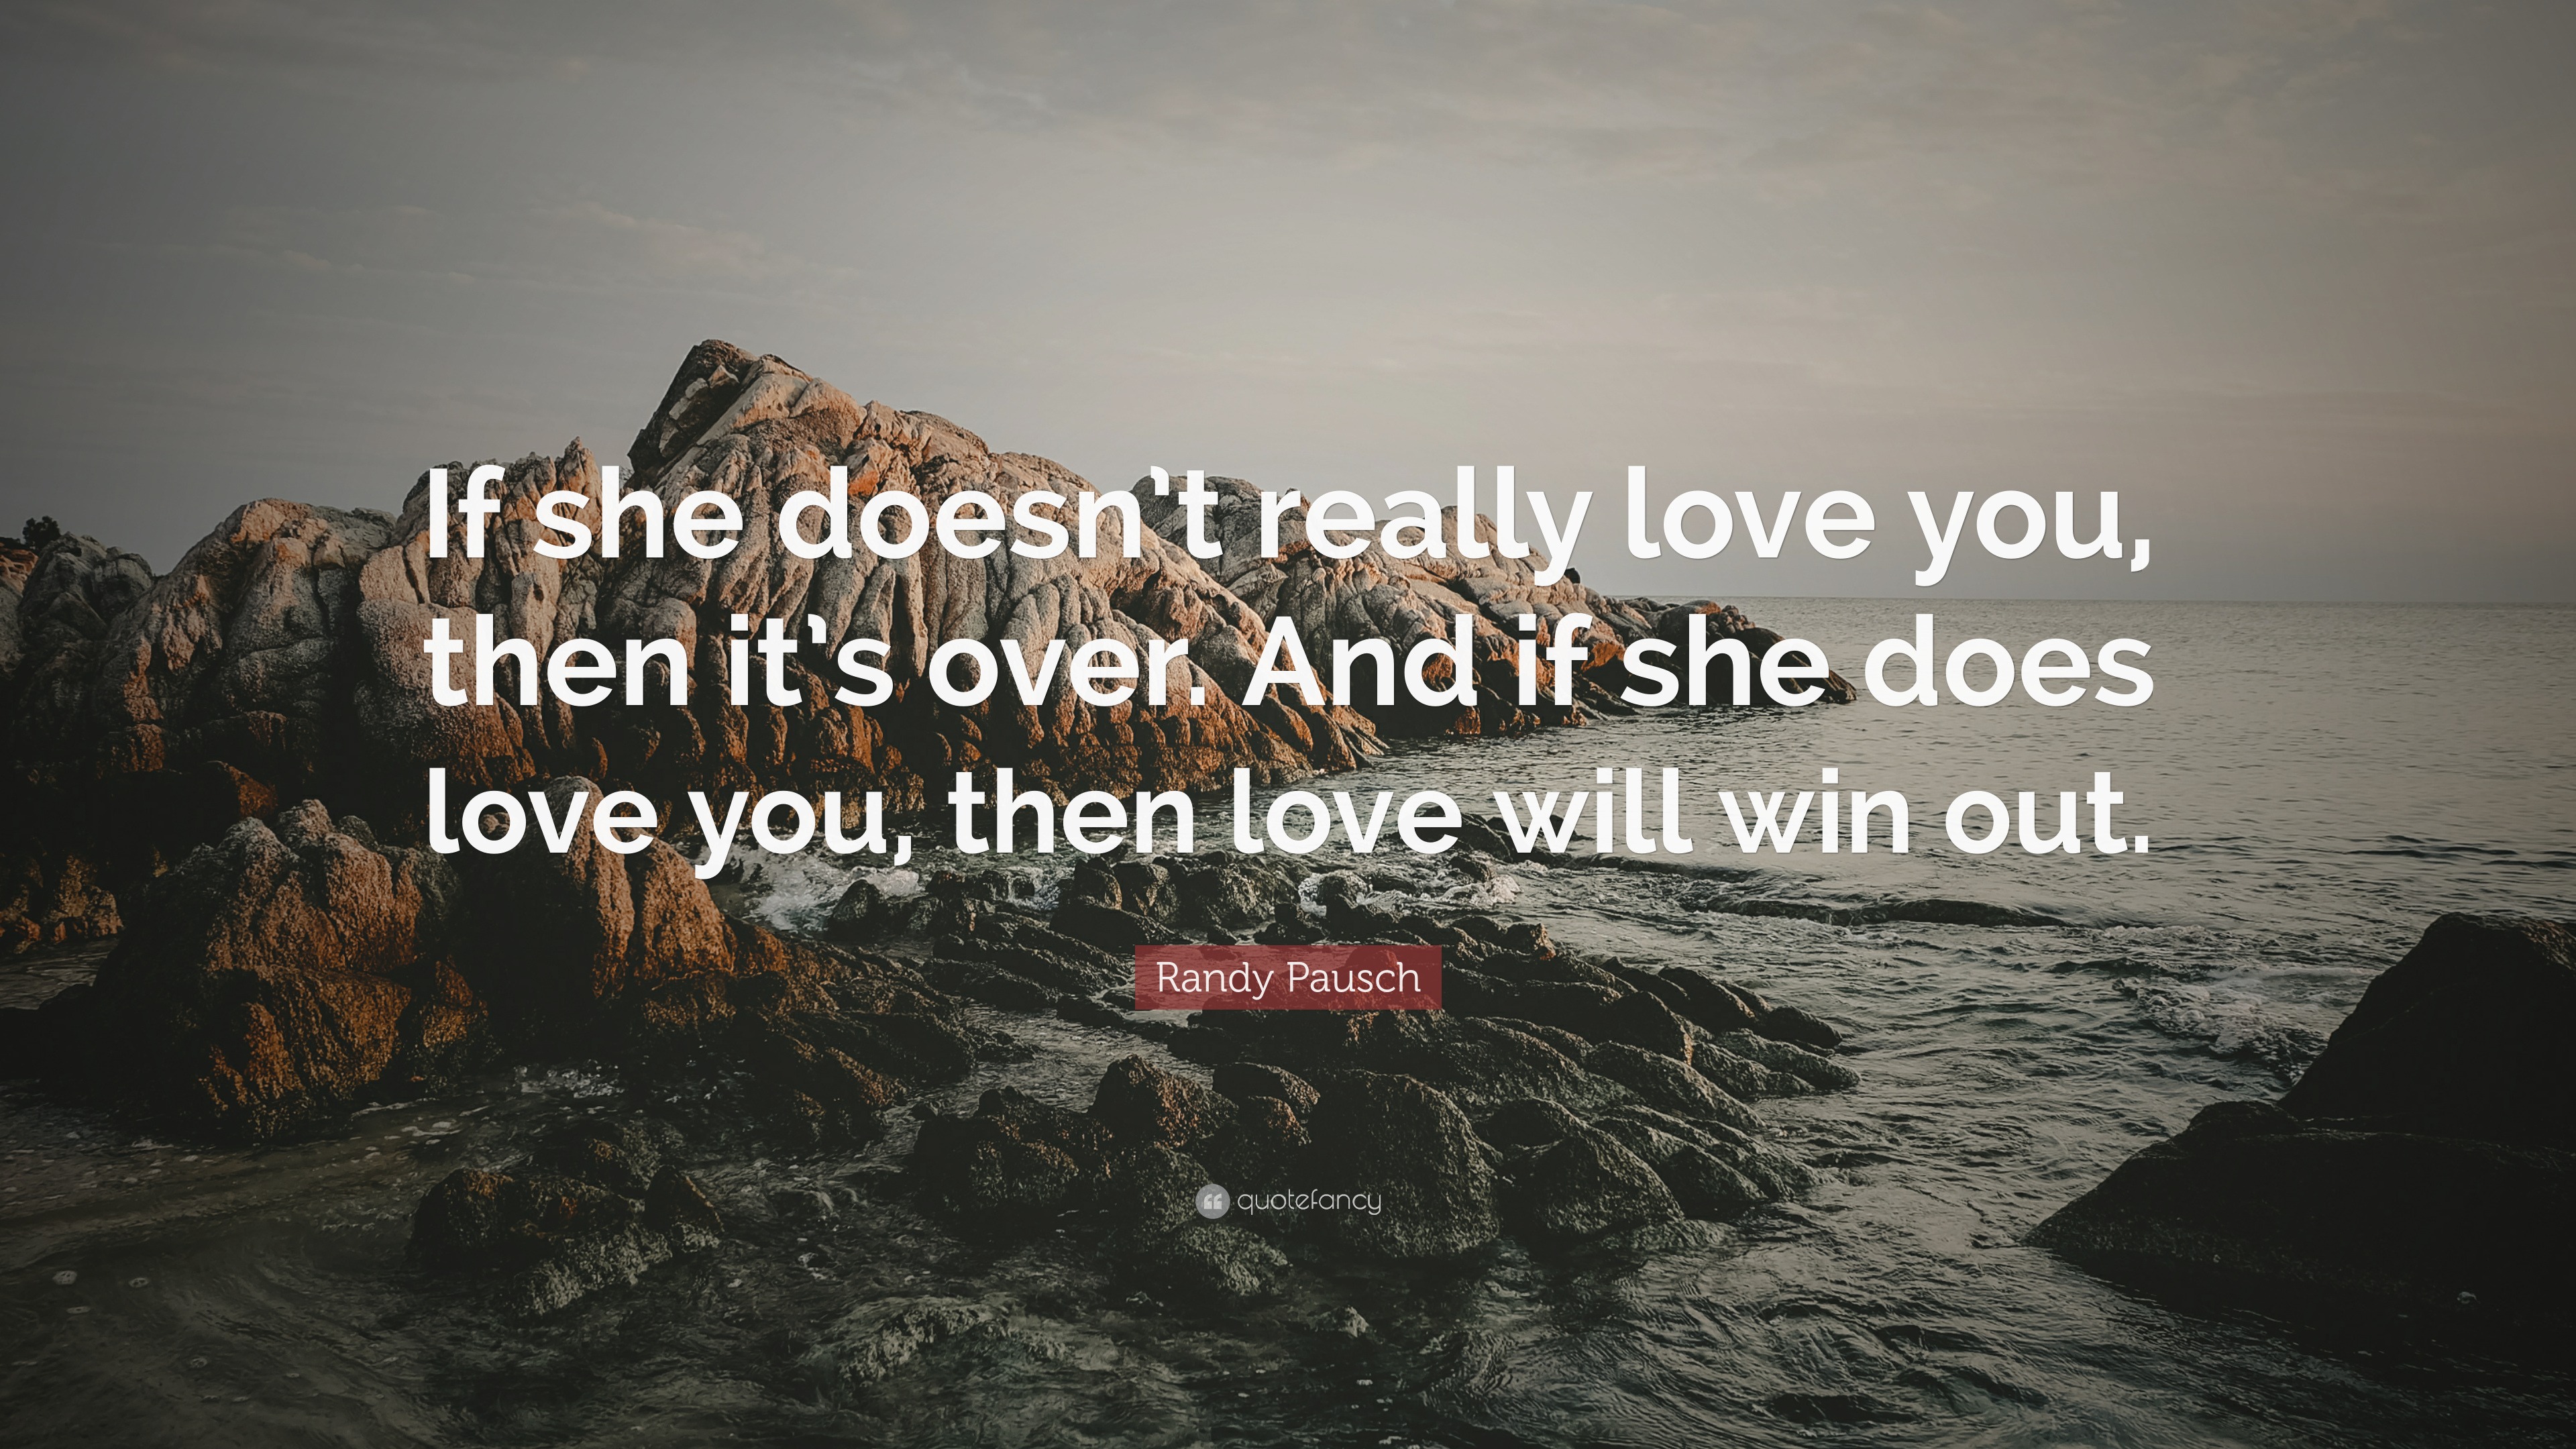 Randy Pausch Quote: “If she doesn’t really love you, then it’s over ...